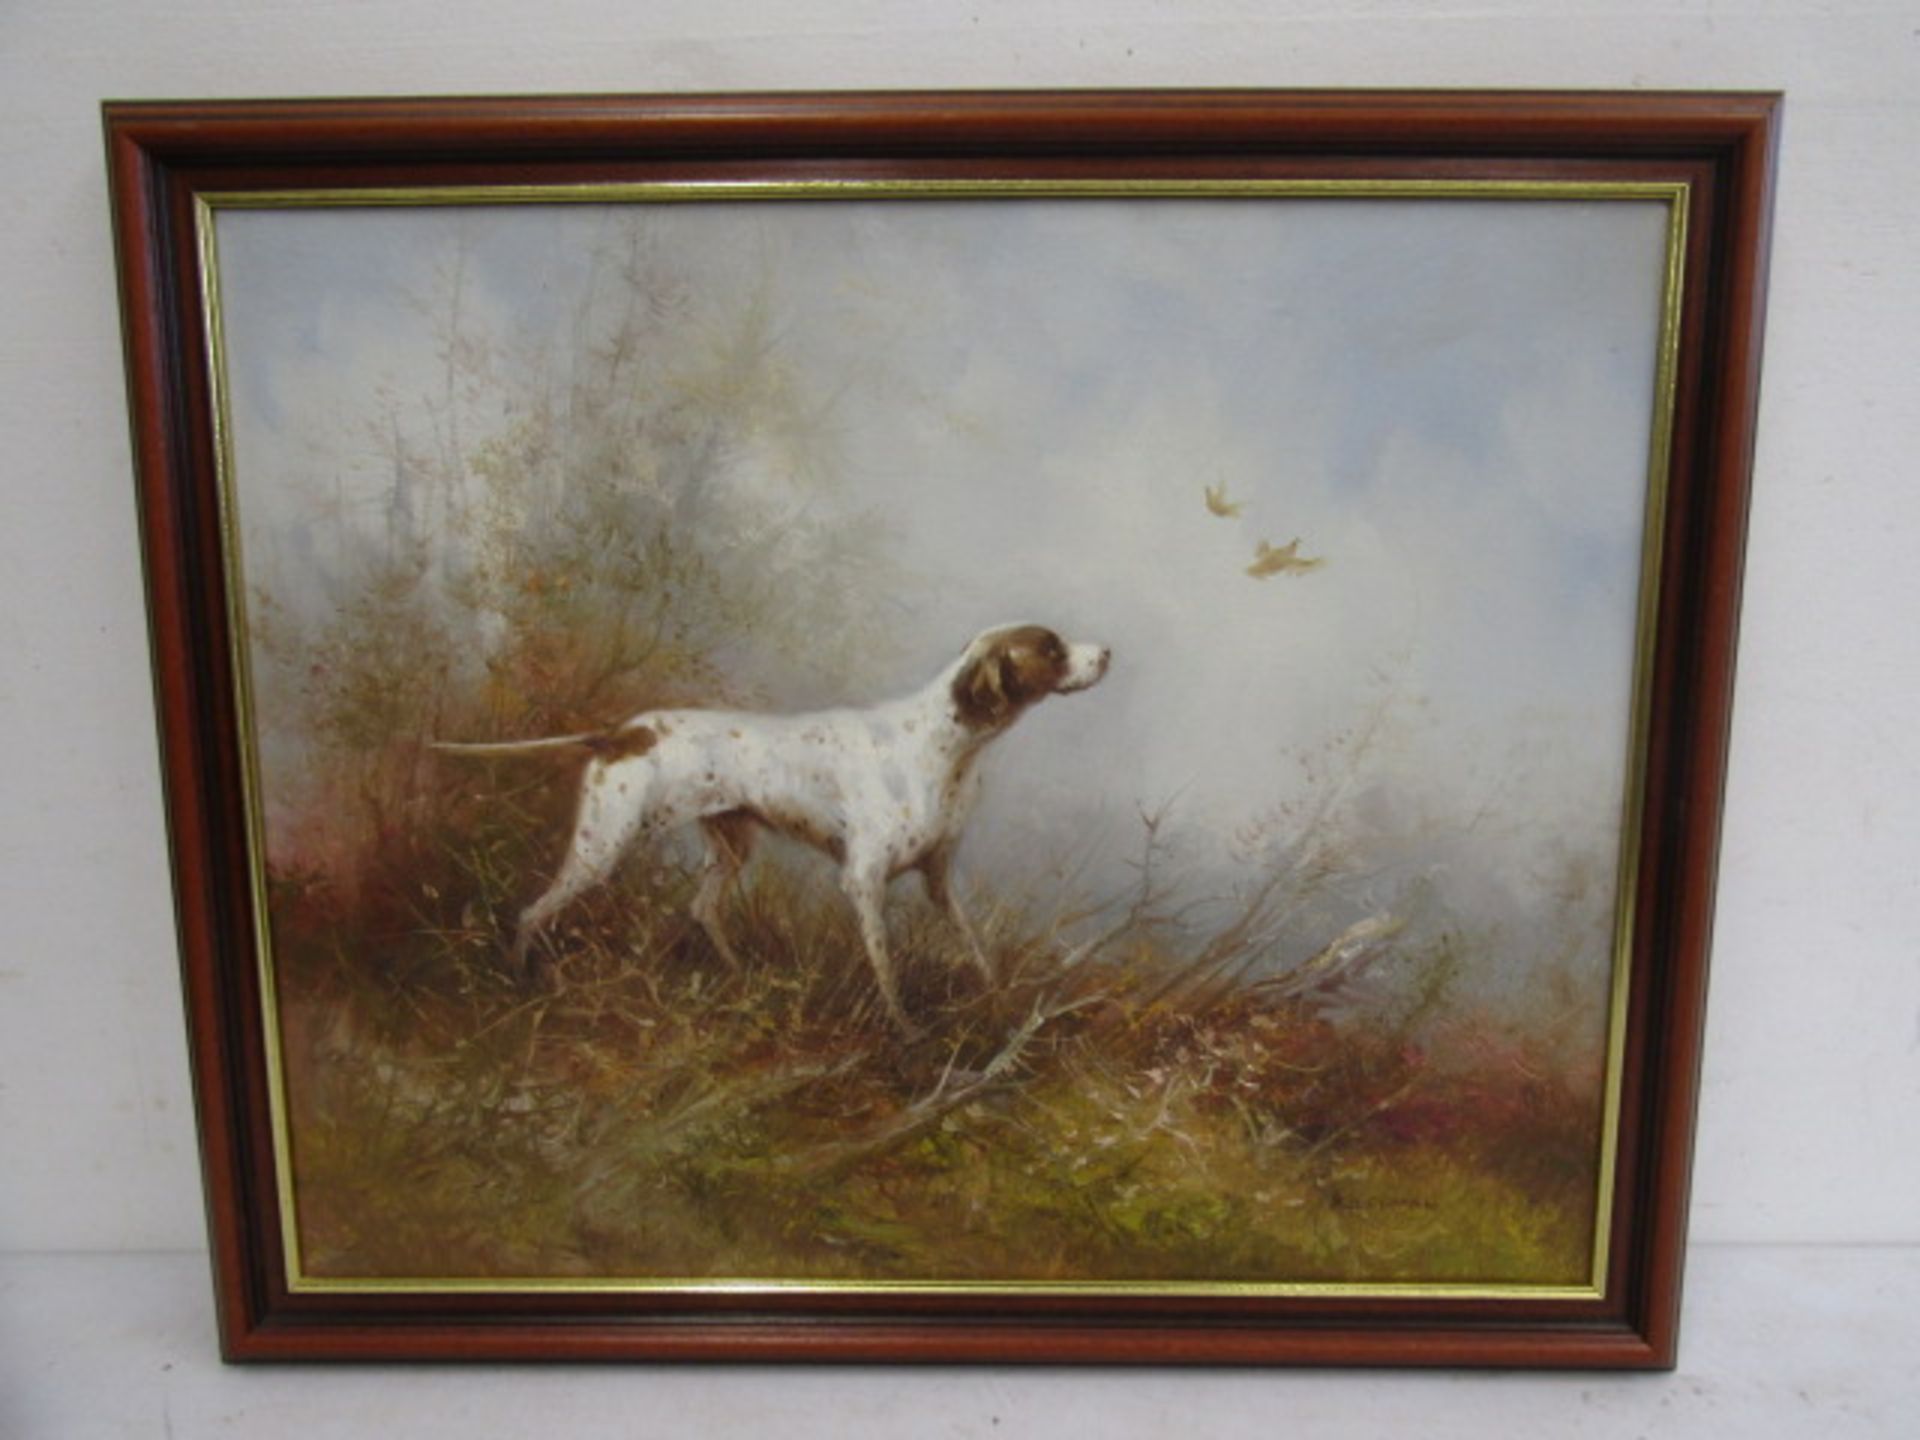 Signed oil on canvas Coffman? Pointer titled 'Good Lad' on verso 57x49cm